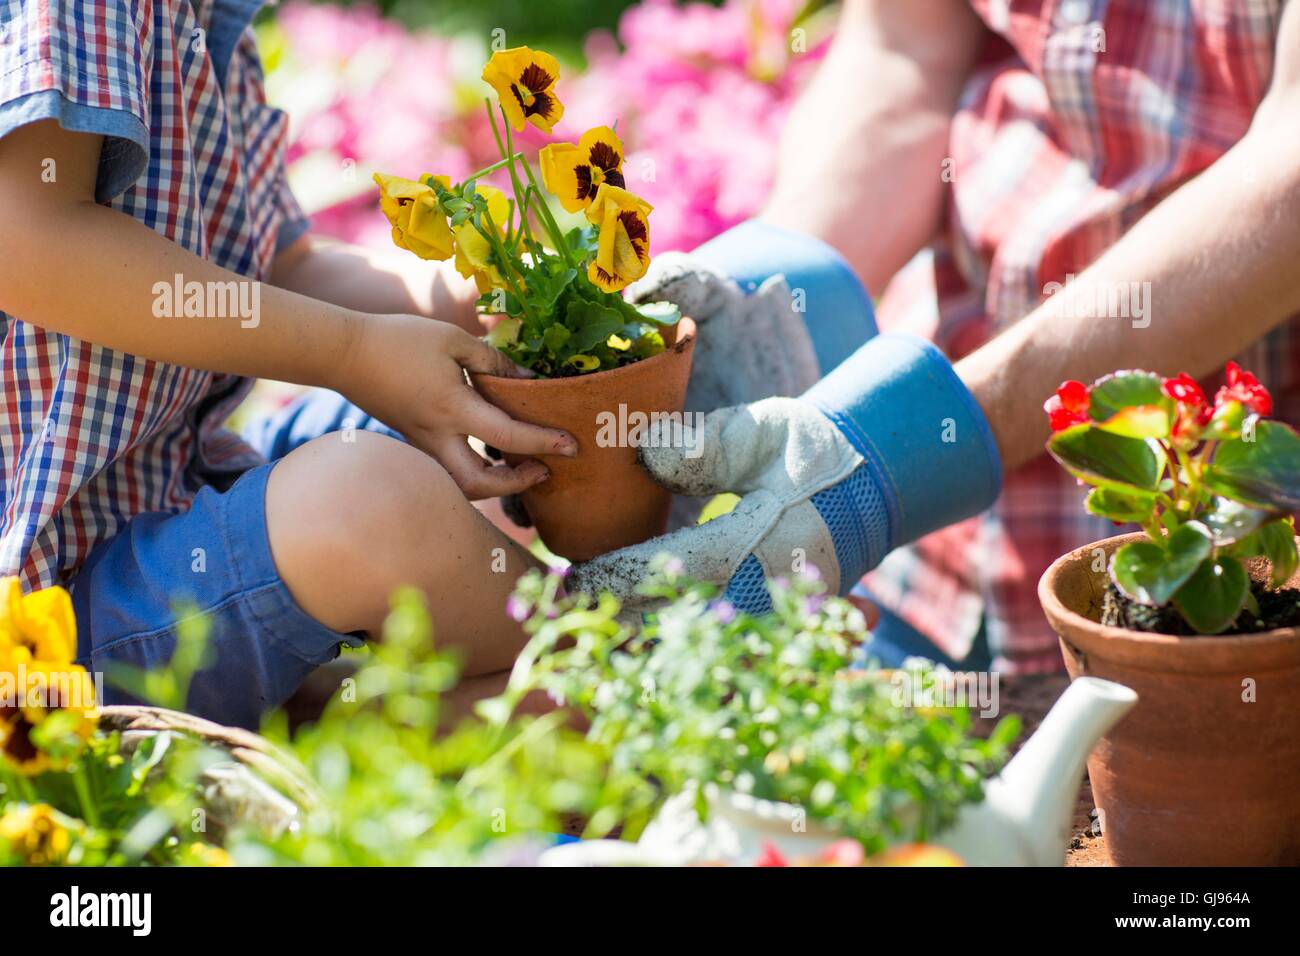 PROPERTY RELEASED. MODEL RELEASED. Father and son holding plant in garden, close up. Stock Photo